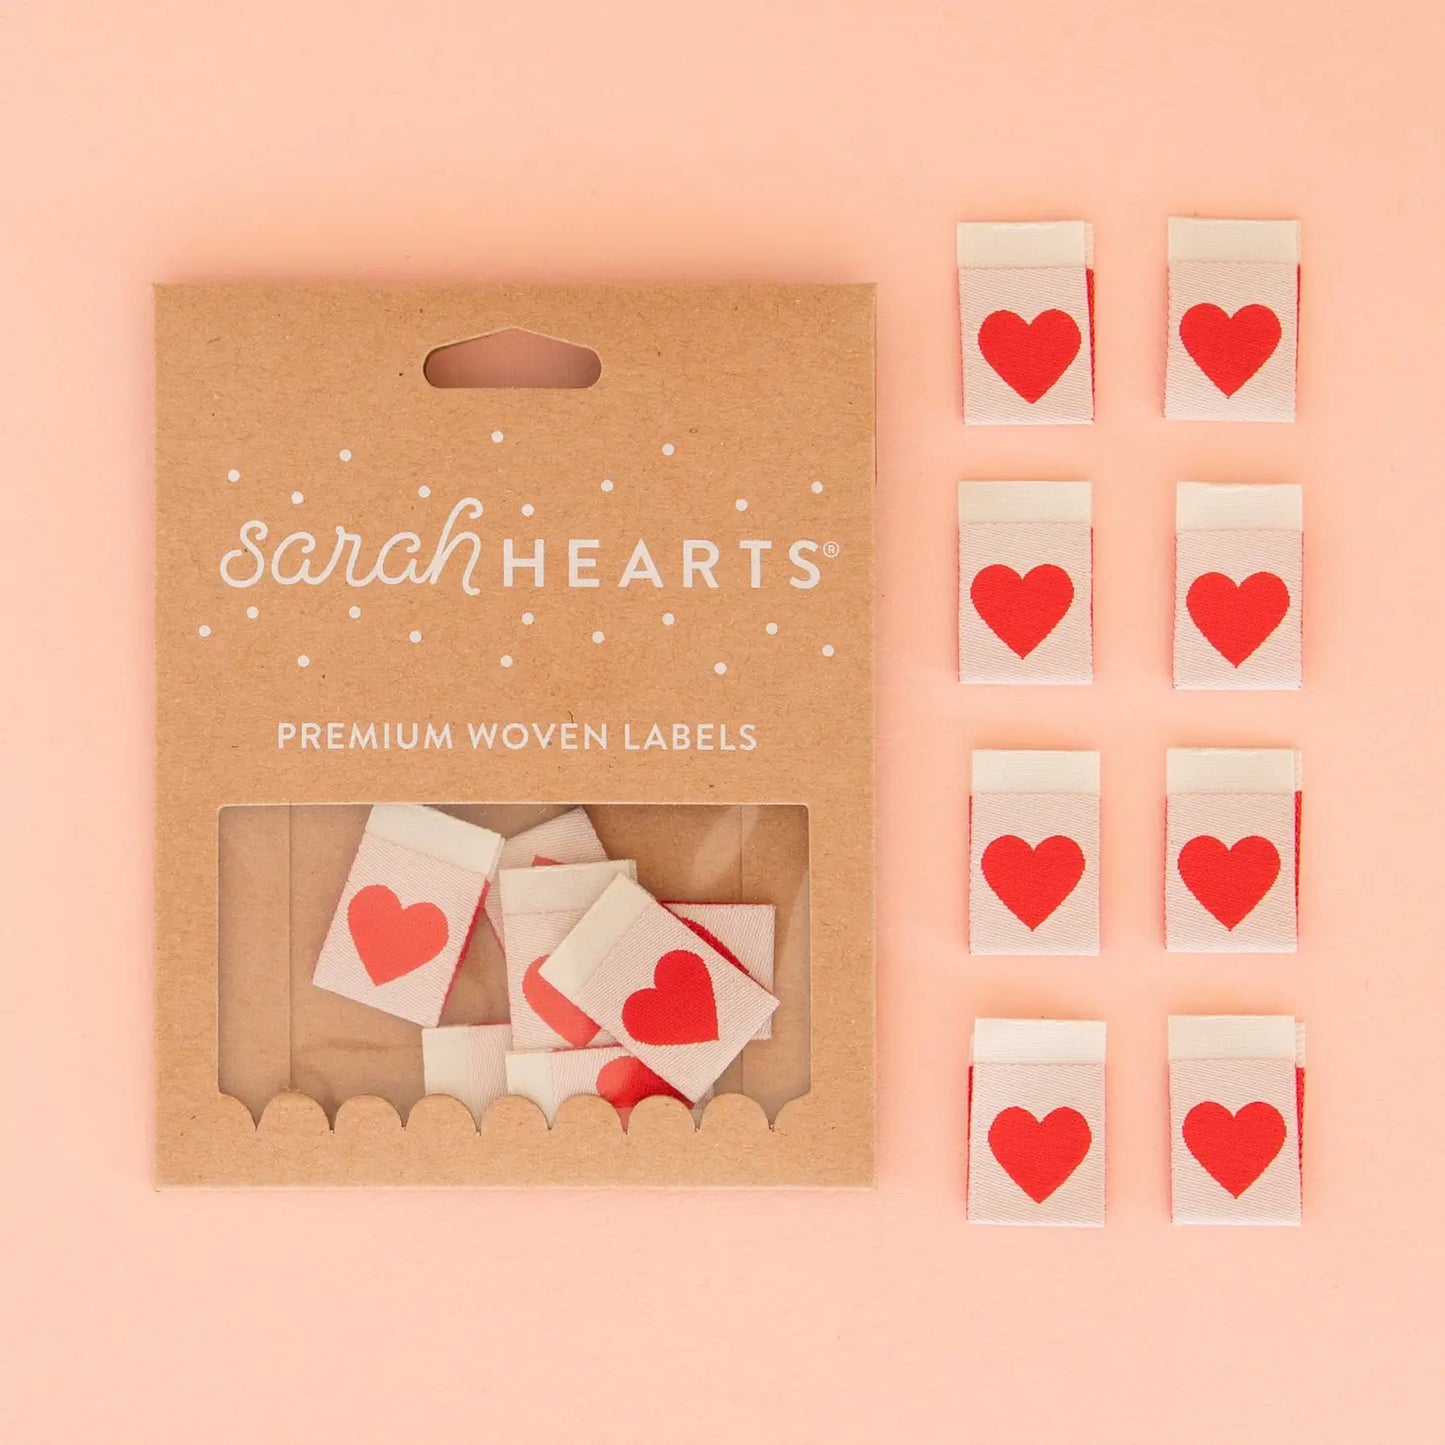 SARAH HEARTS - Premium Woven Labels - Red Heart Woven Label